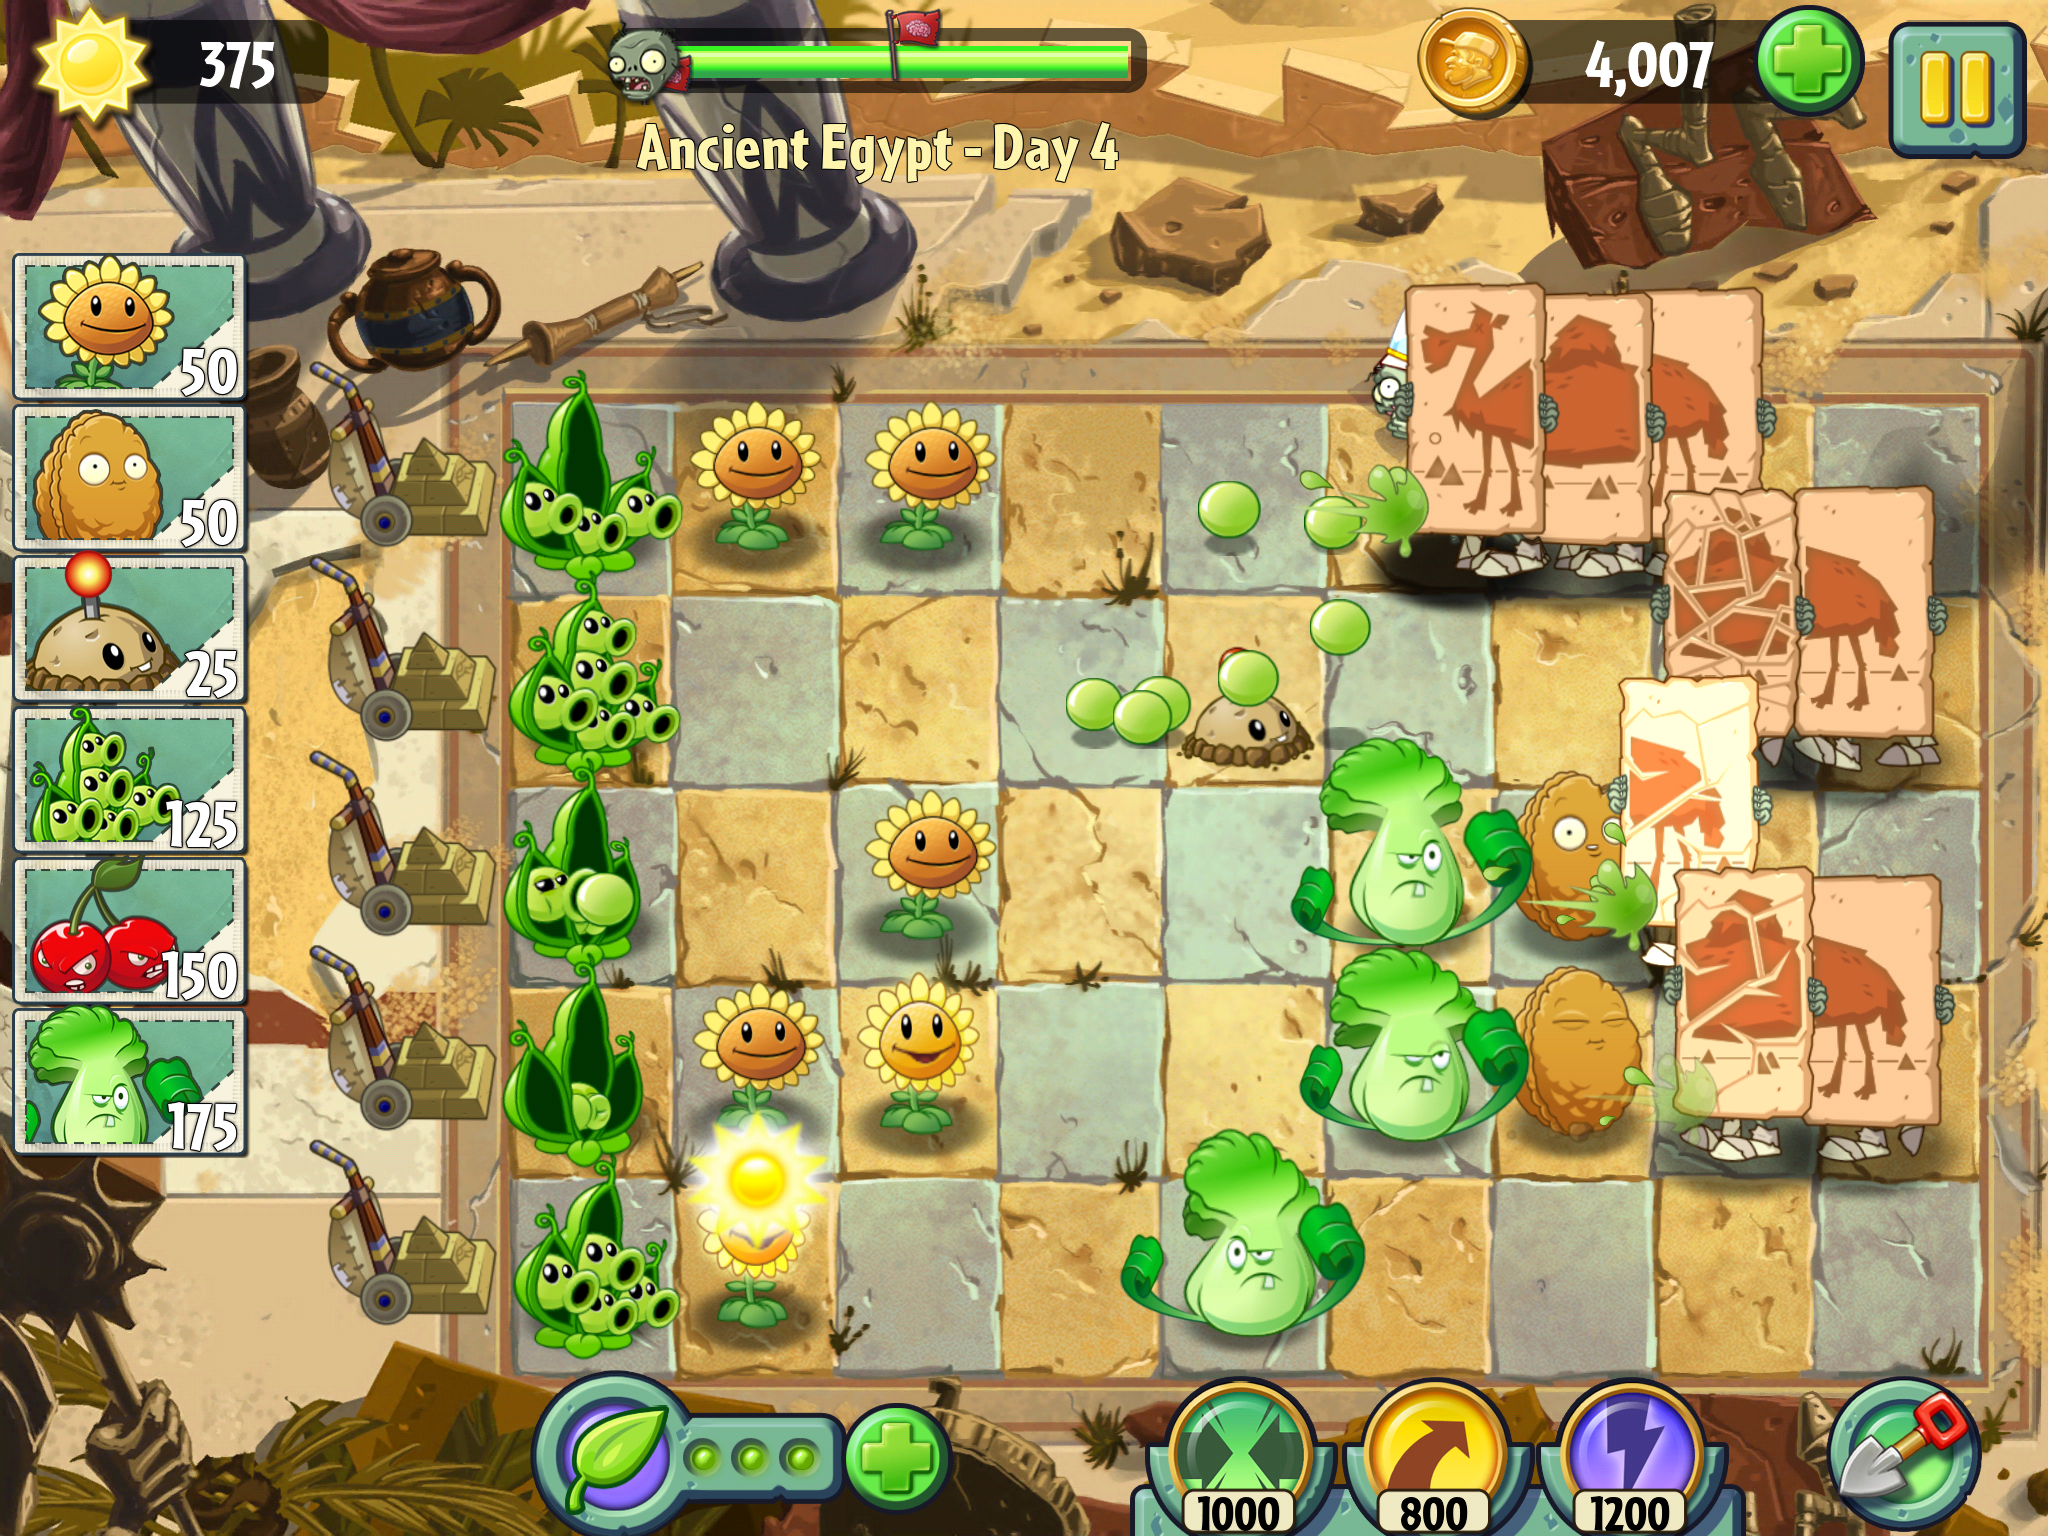 How Plants vs. Zombies 2 Works as a Free-to-Play Game